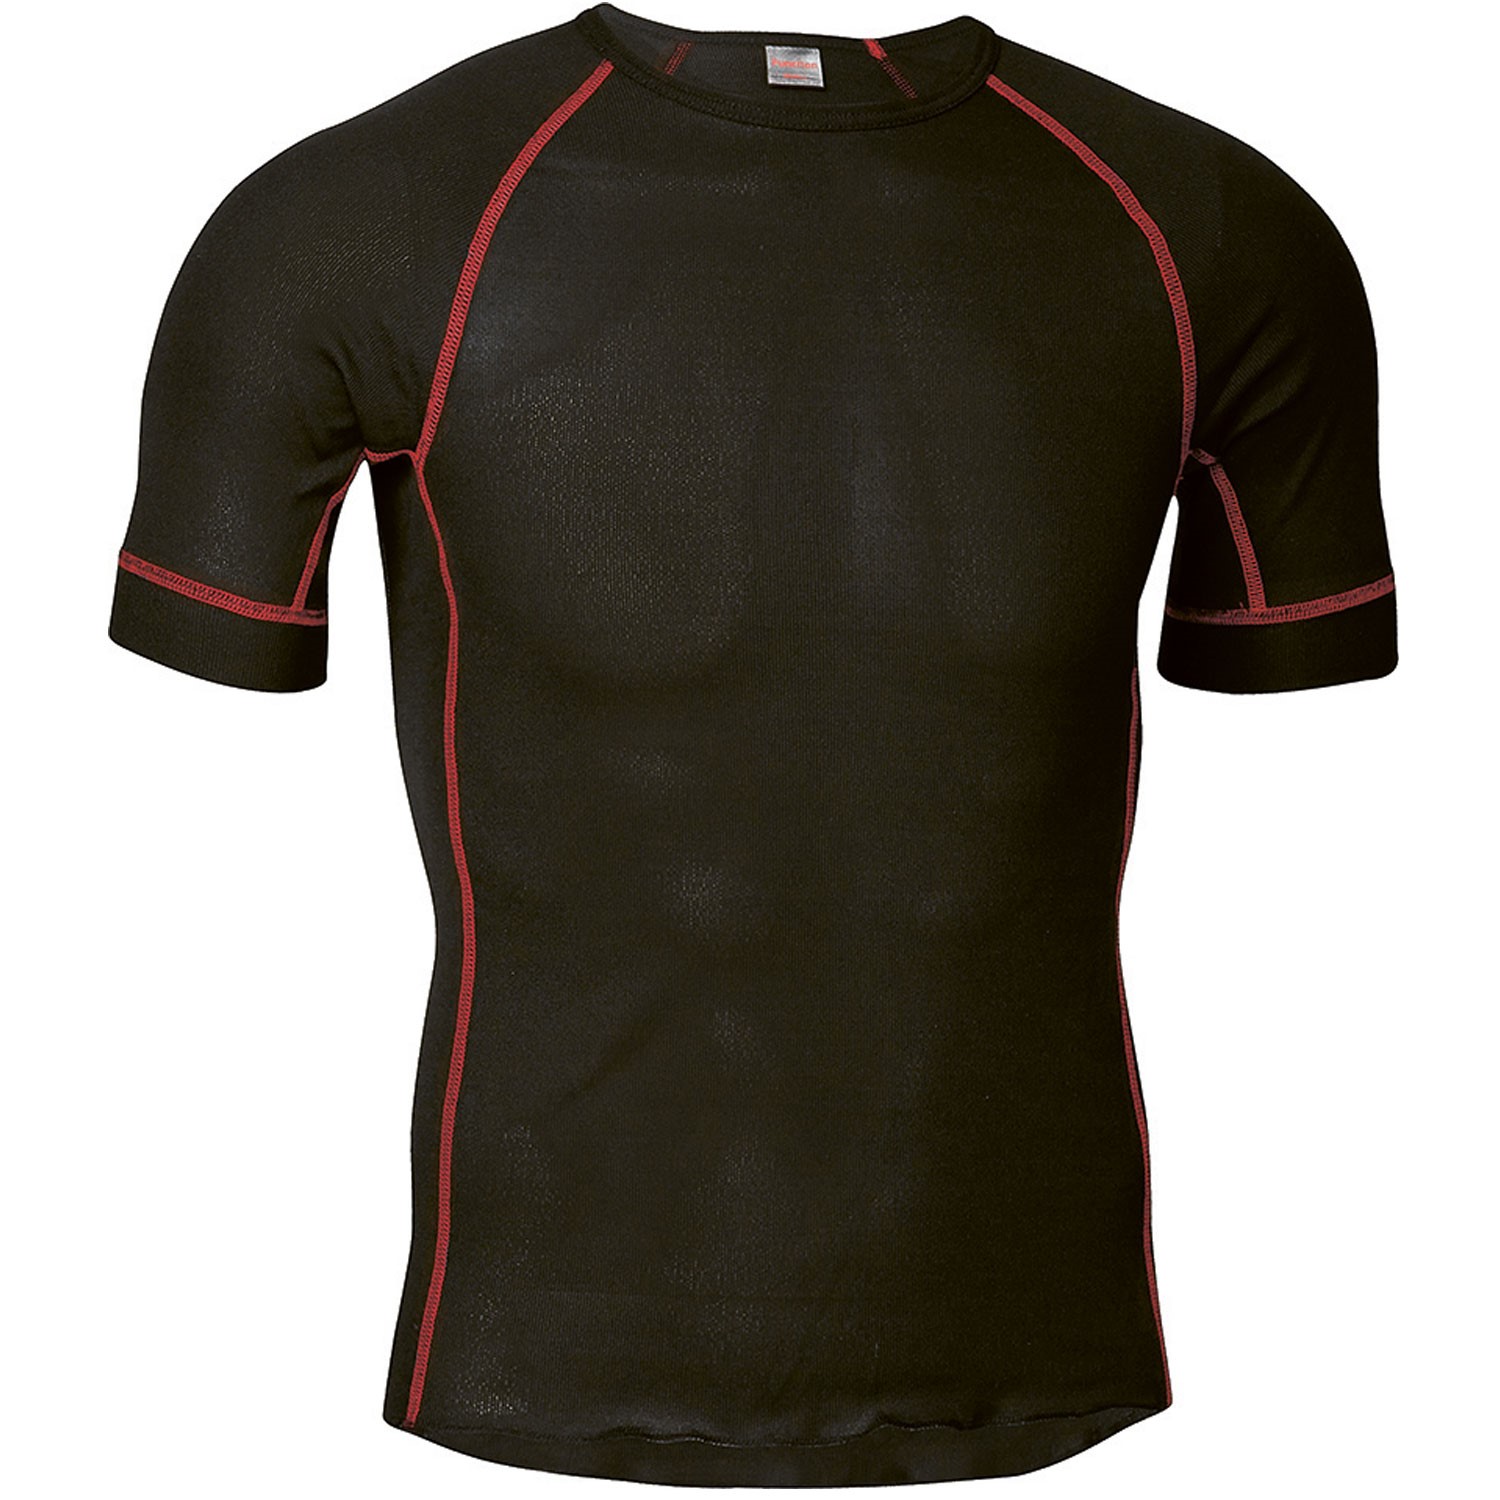 JBS Classic Function T-shirt - Base layer - Clothing - Timarco.co.uk